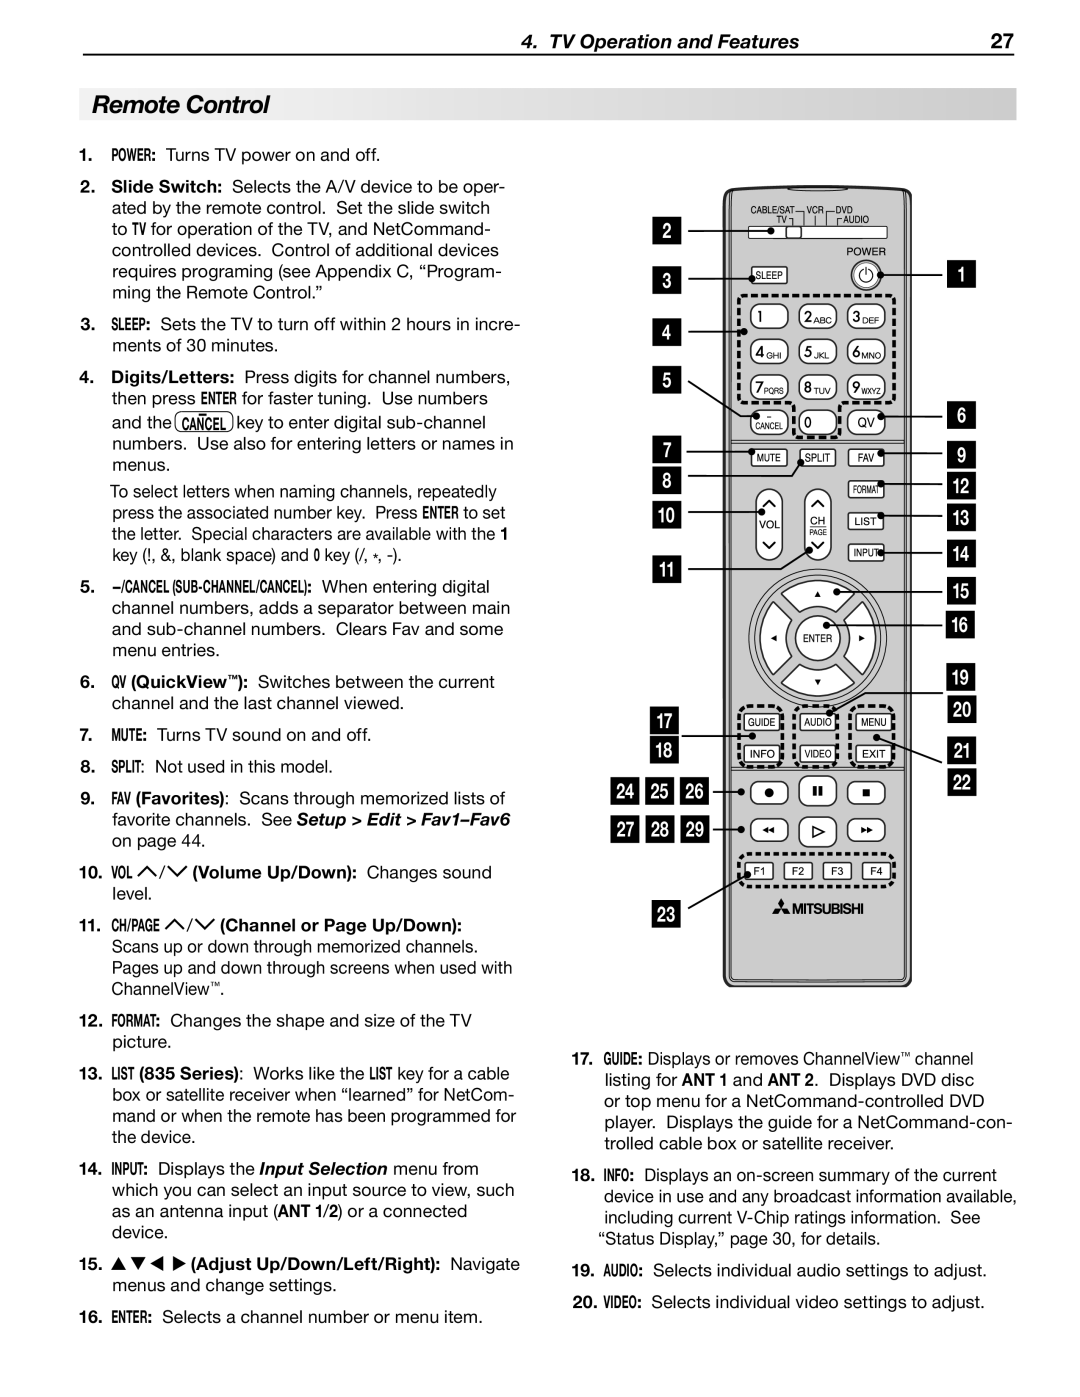 Mitsubishi Electronics WD-60C8 manual Remote Control, Adjust Up/Down/Left/Right Navigate menus and change settings 